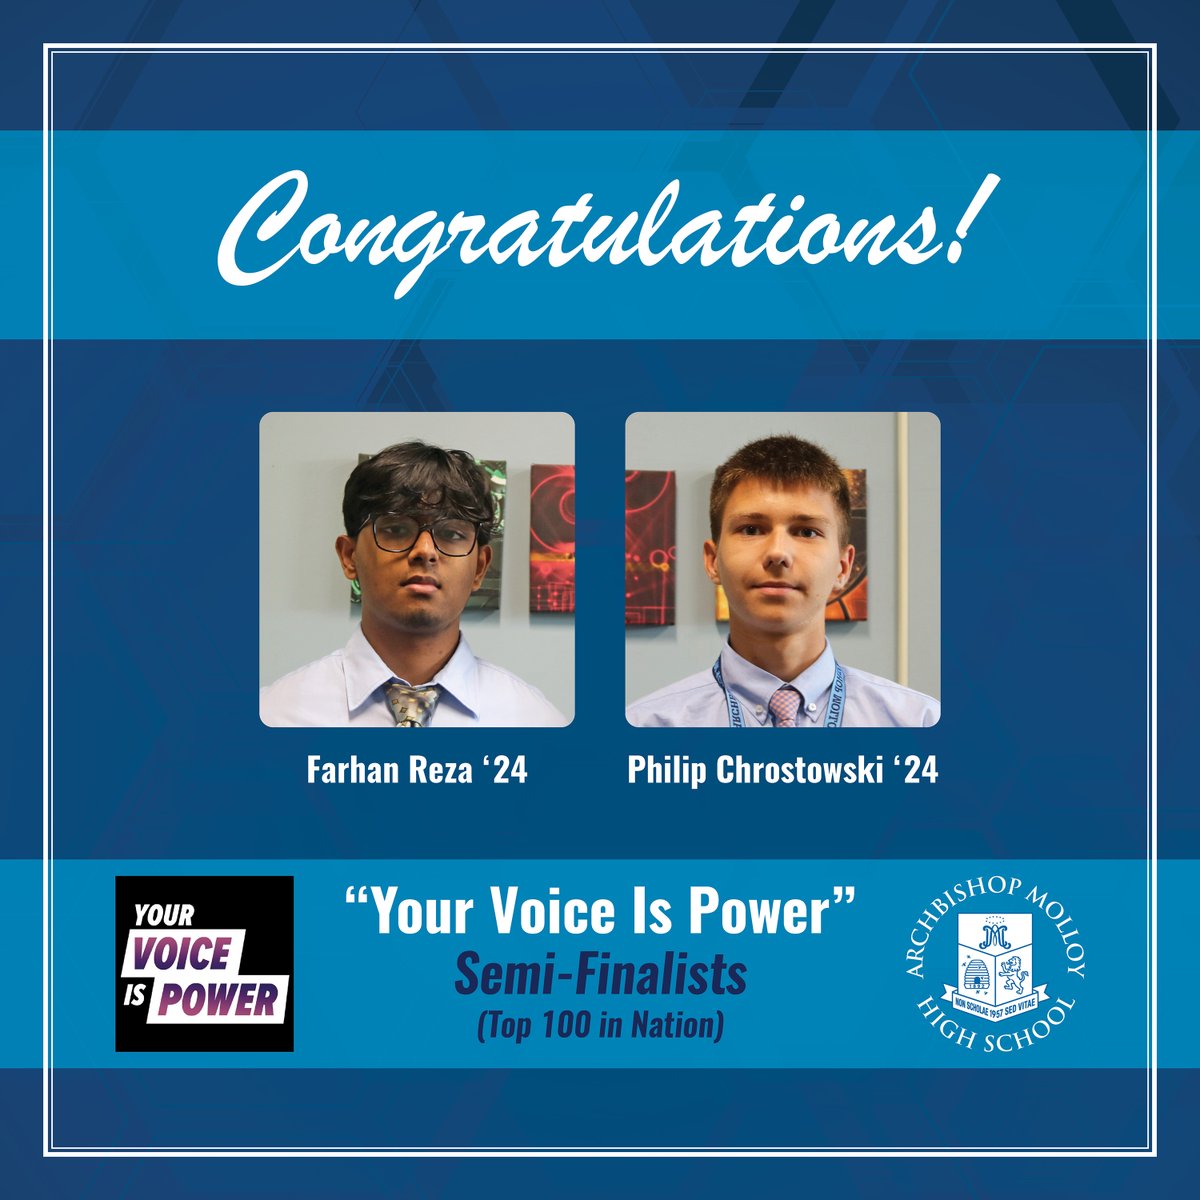 Congratulations to Philip Chrostowski ’24 and Farhan Reza ‘24, who have been selected as Round 2 Semi-Finalists (Top 100 in the nation) in the 2022 “Your Voice is Power” coding competition! Go to Instagram for more info!